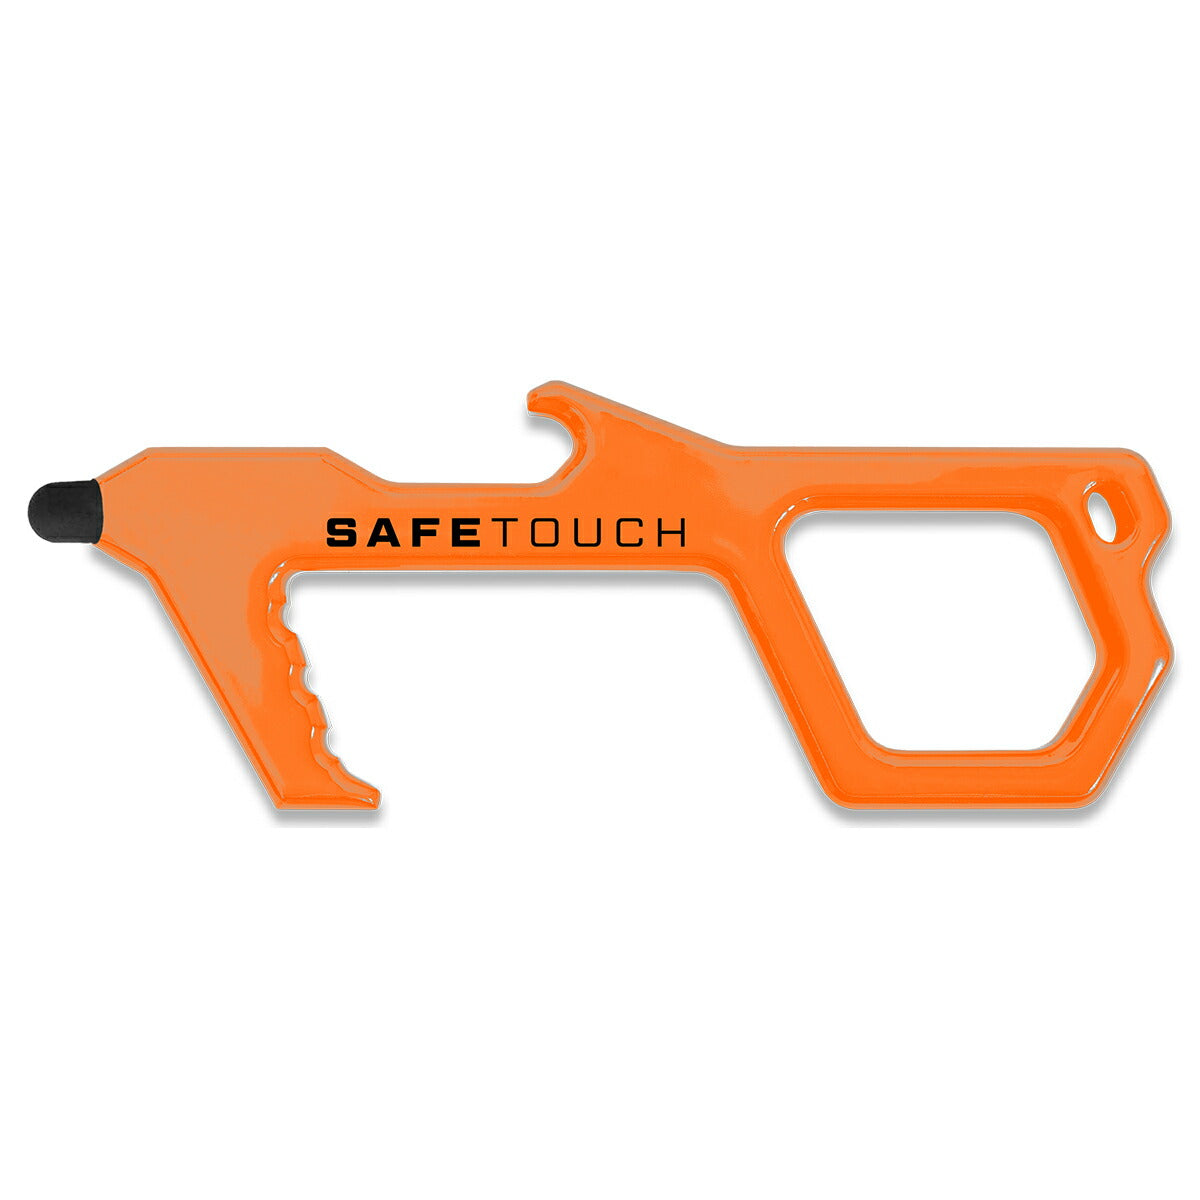 SafeTouch SAFETOUCH 2.0